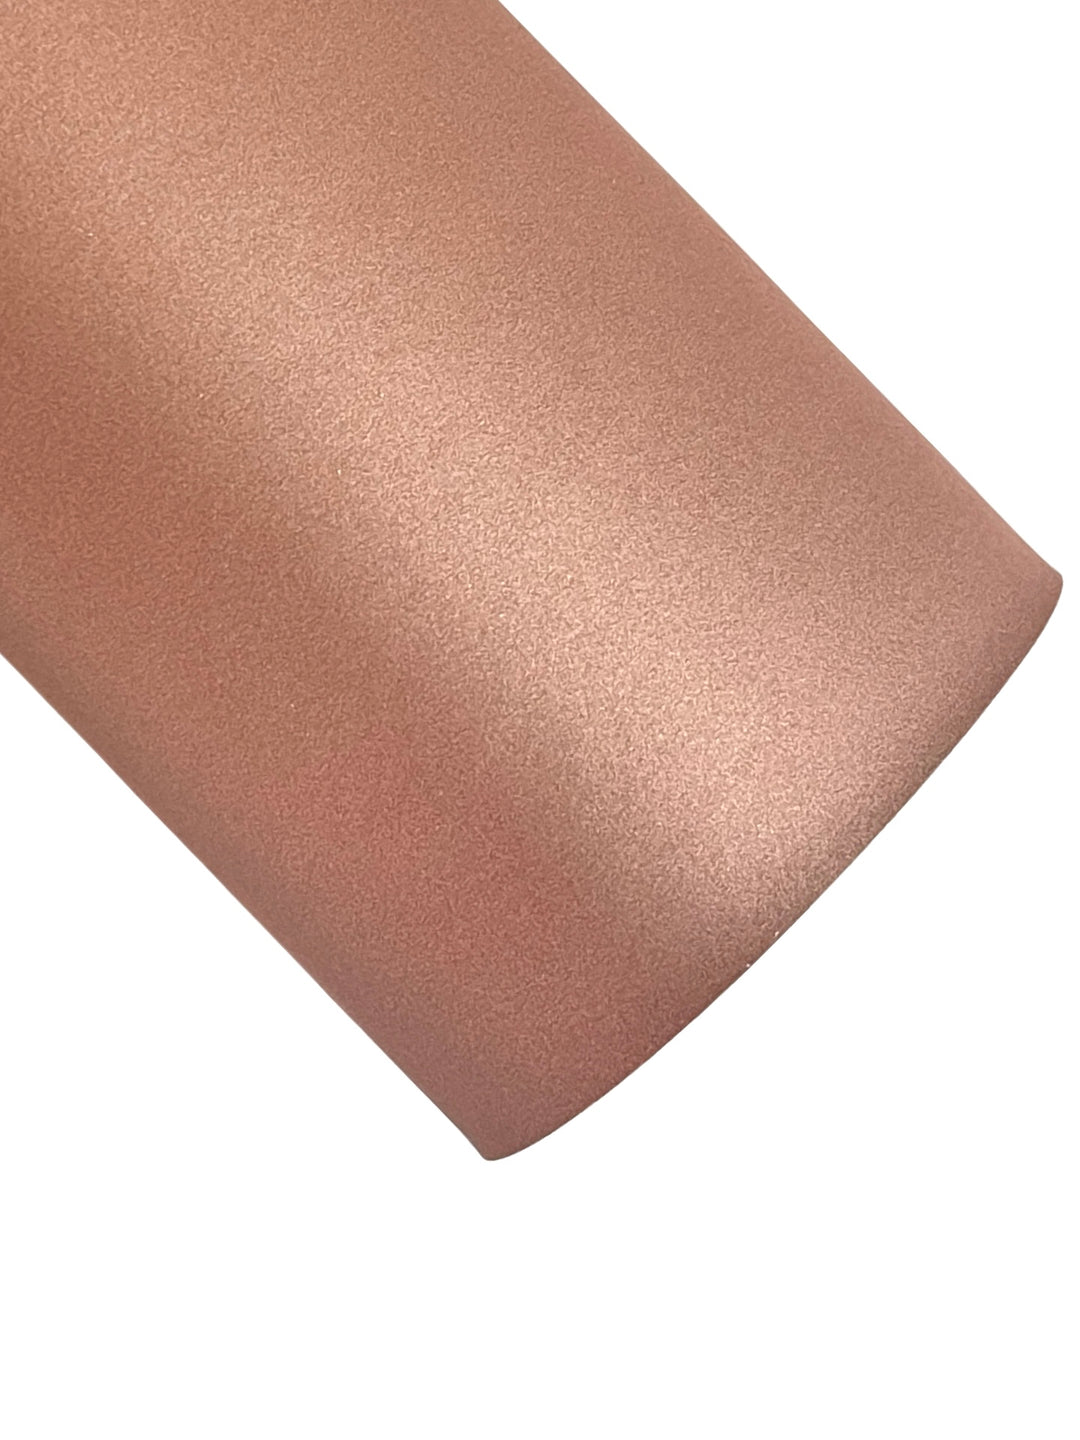 Matte Rose Gold Smooth Leatherette